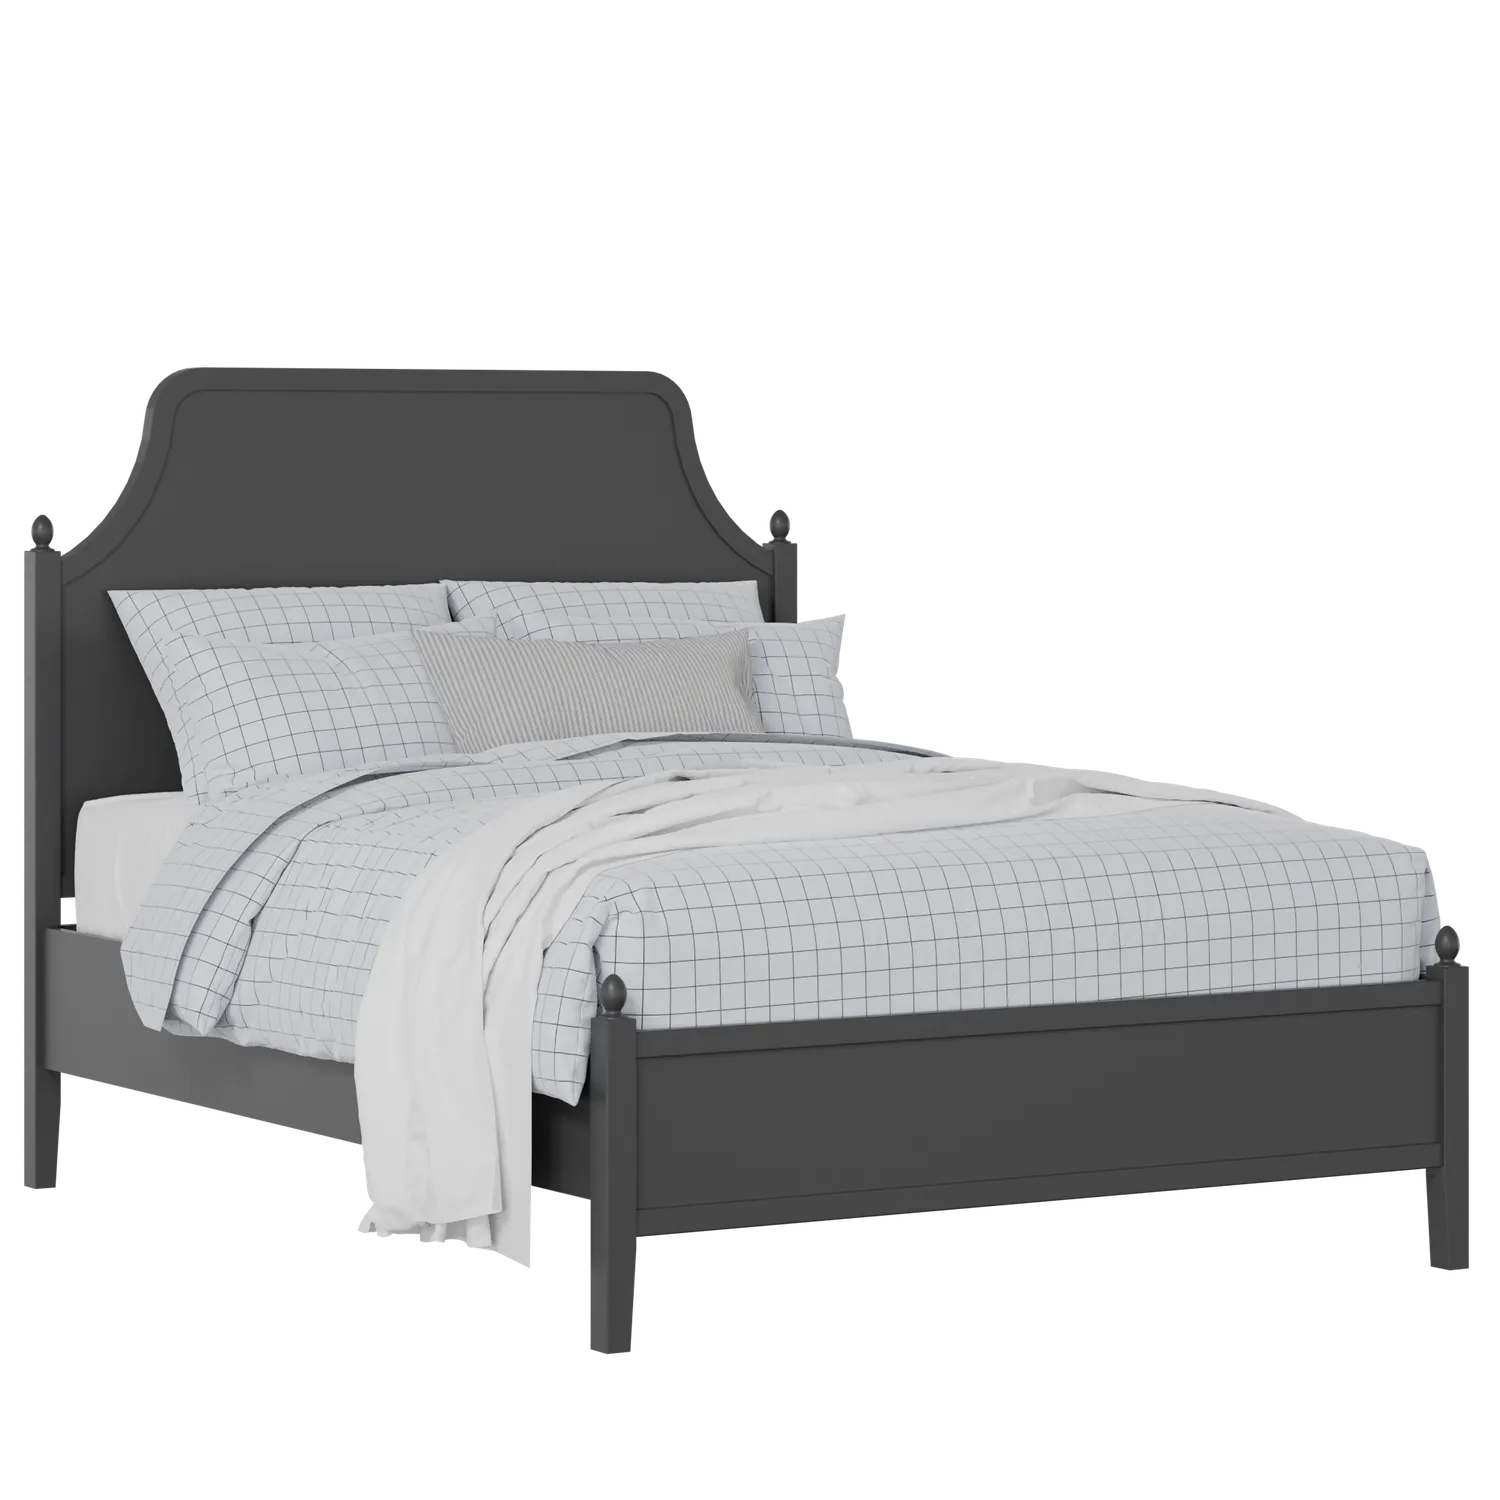 Ruskin Slim painted wood bed in black with Juno mattress